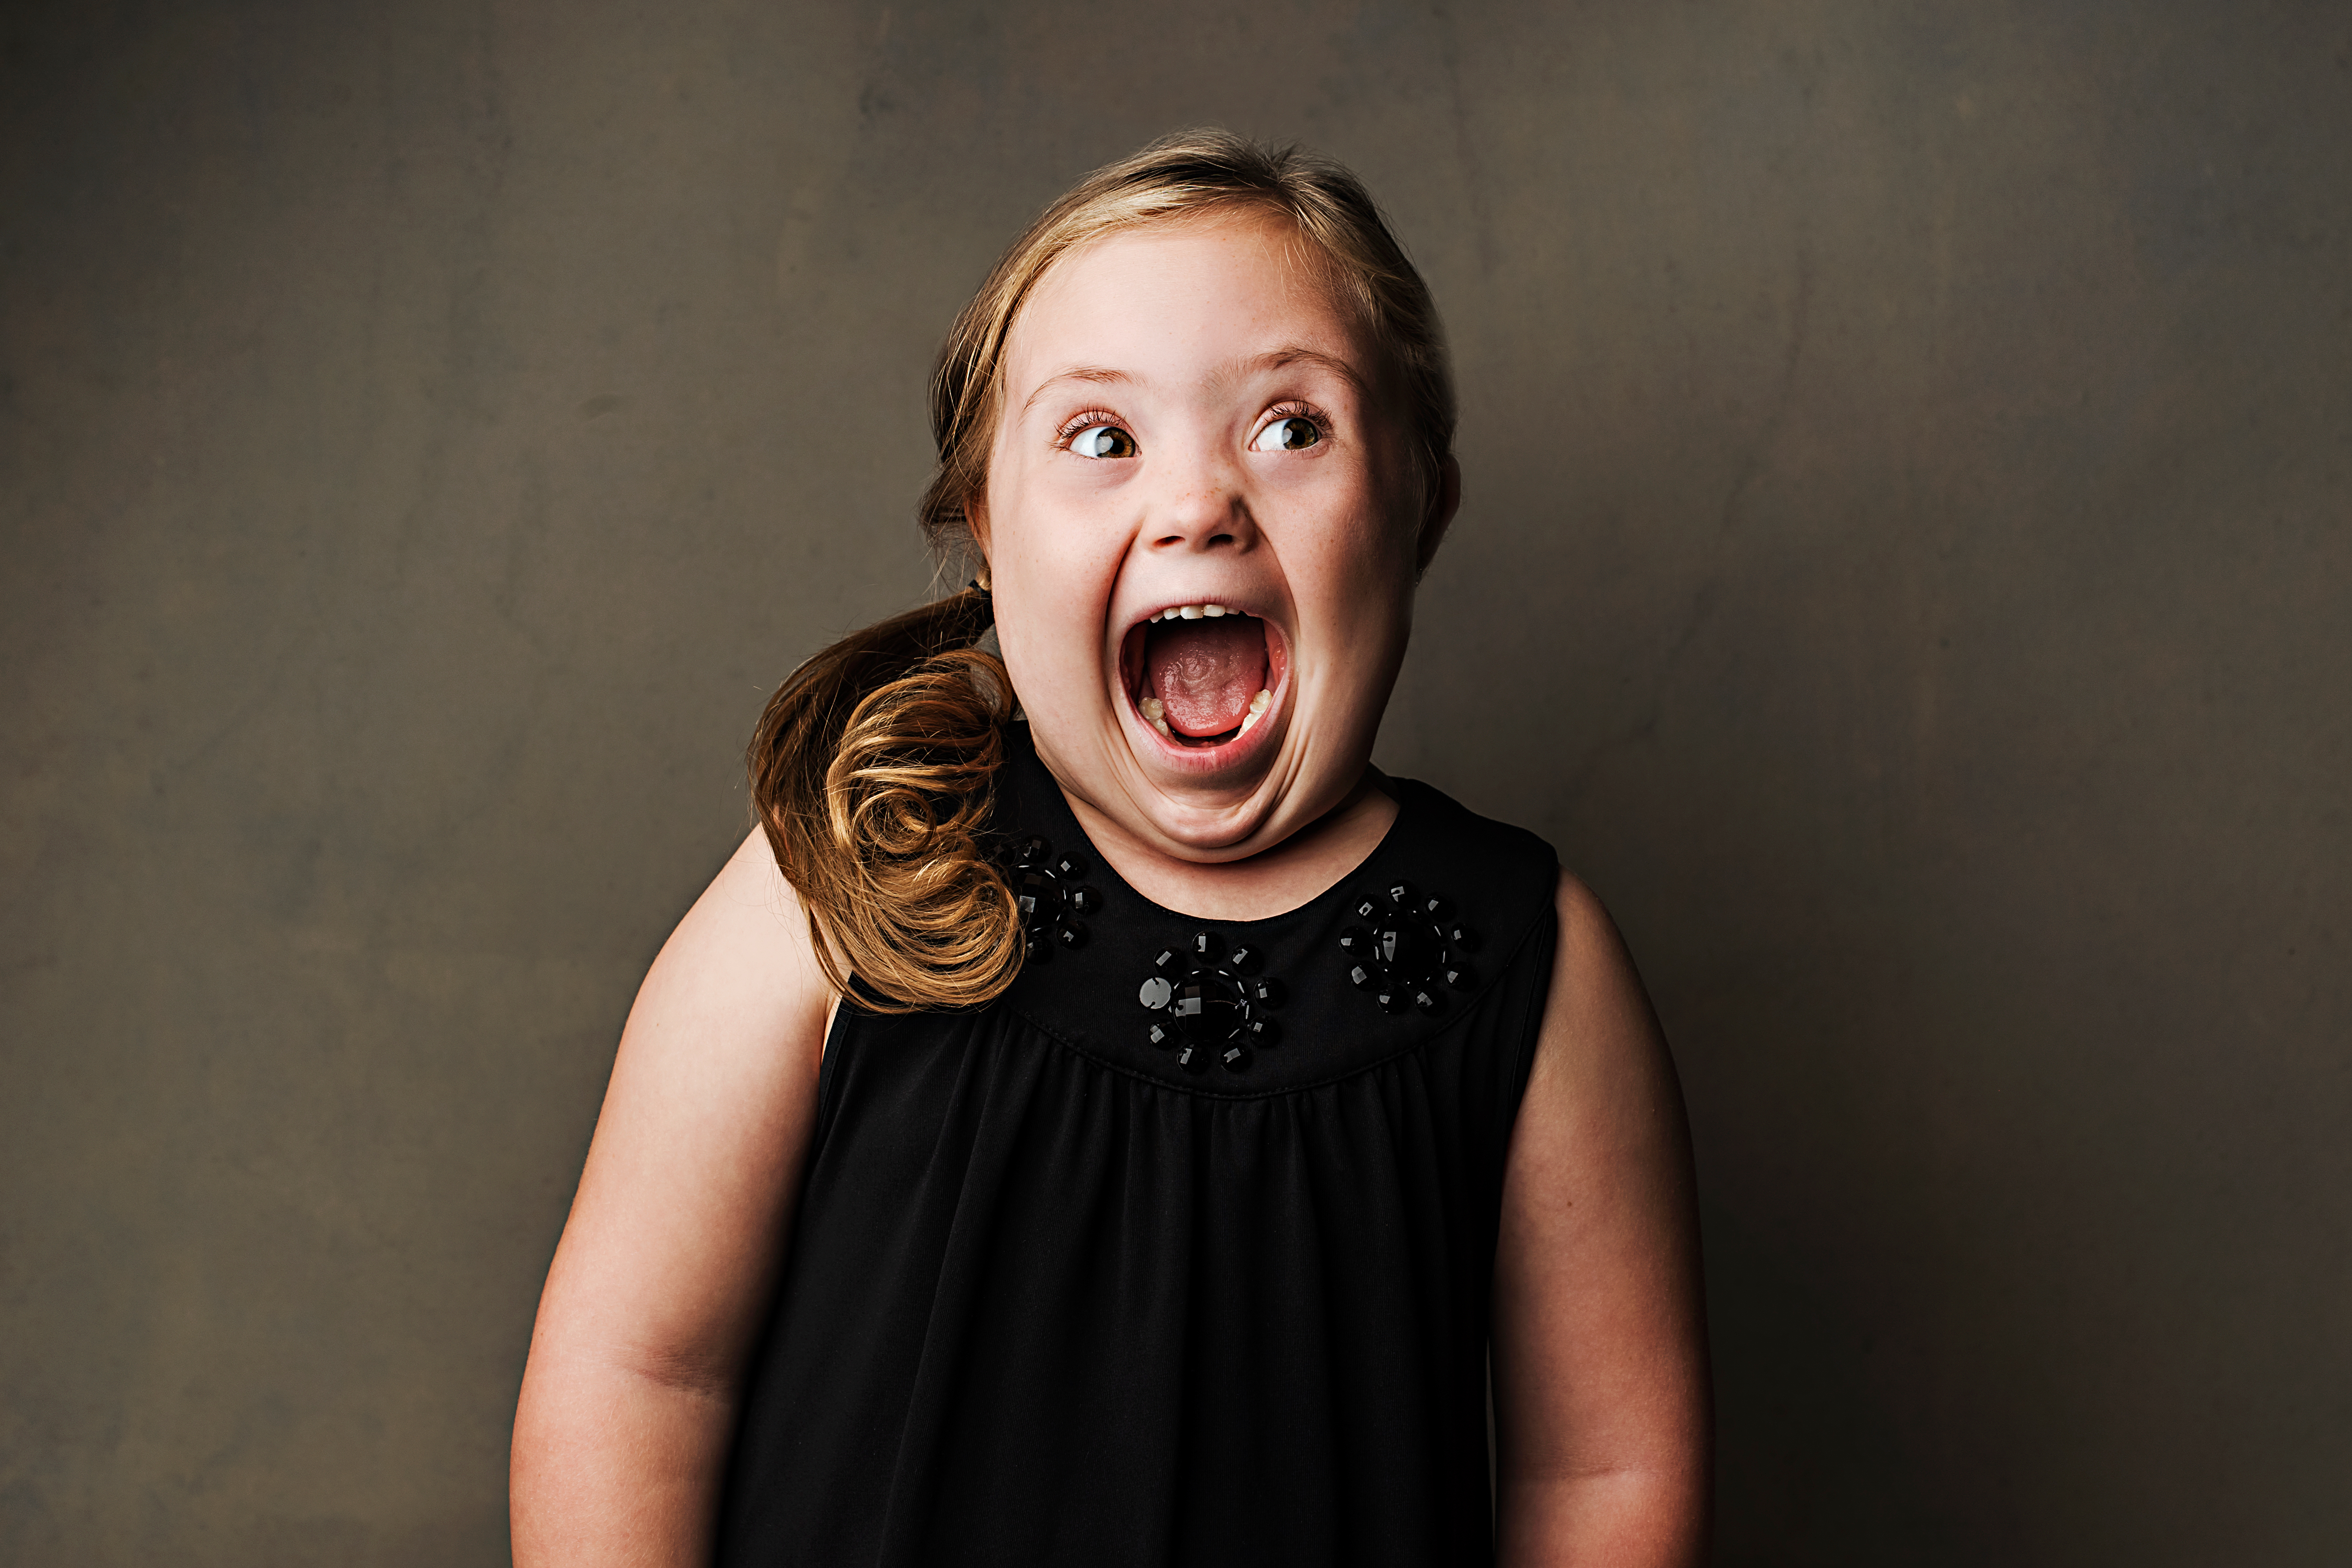 Joyful girl with Down syndrome, wearing a black dress.